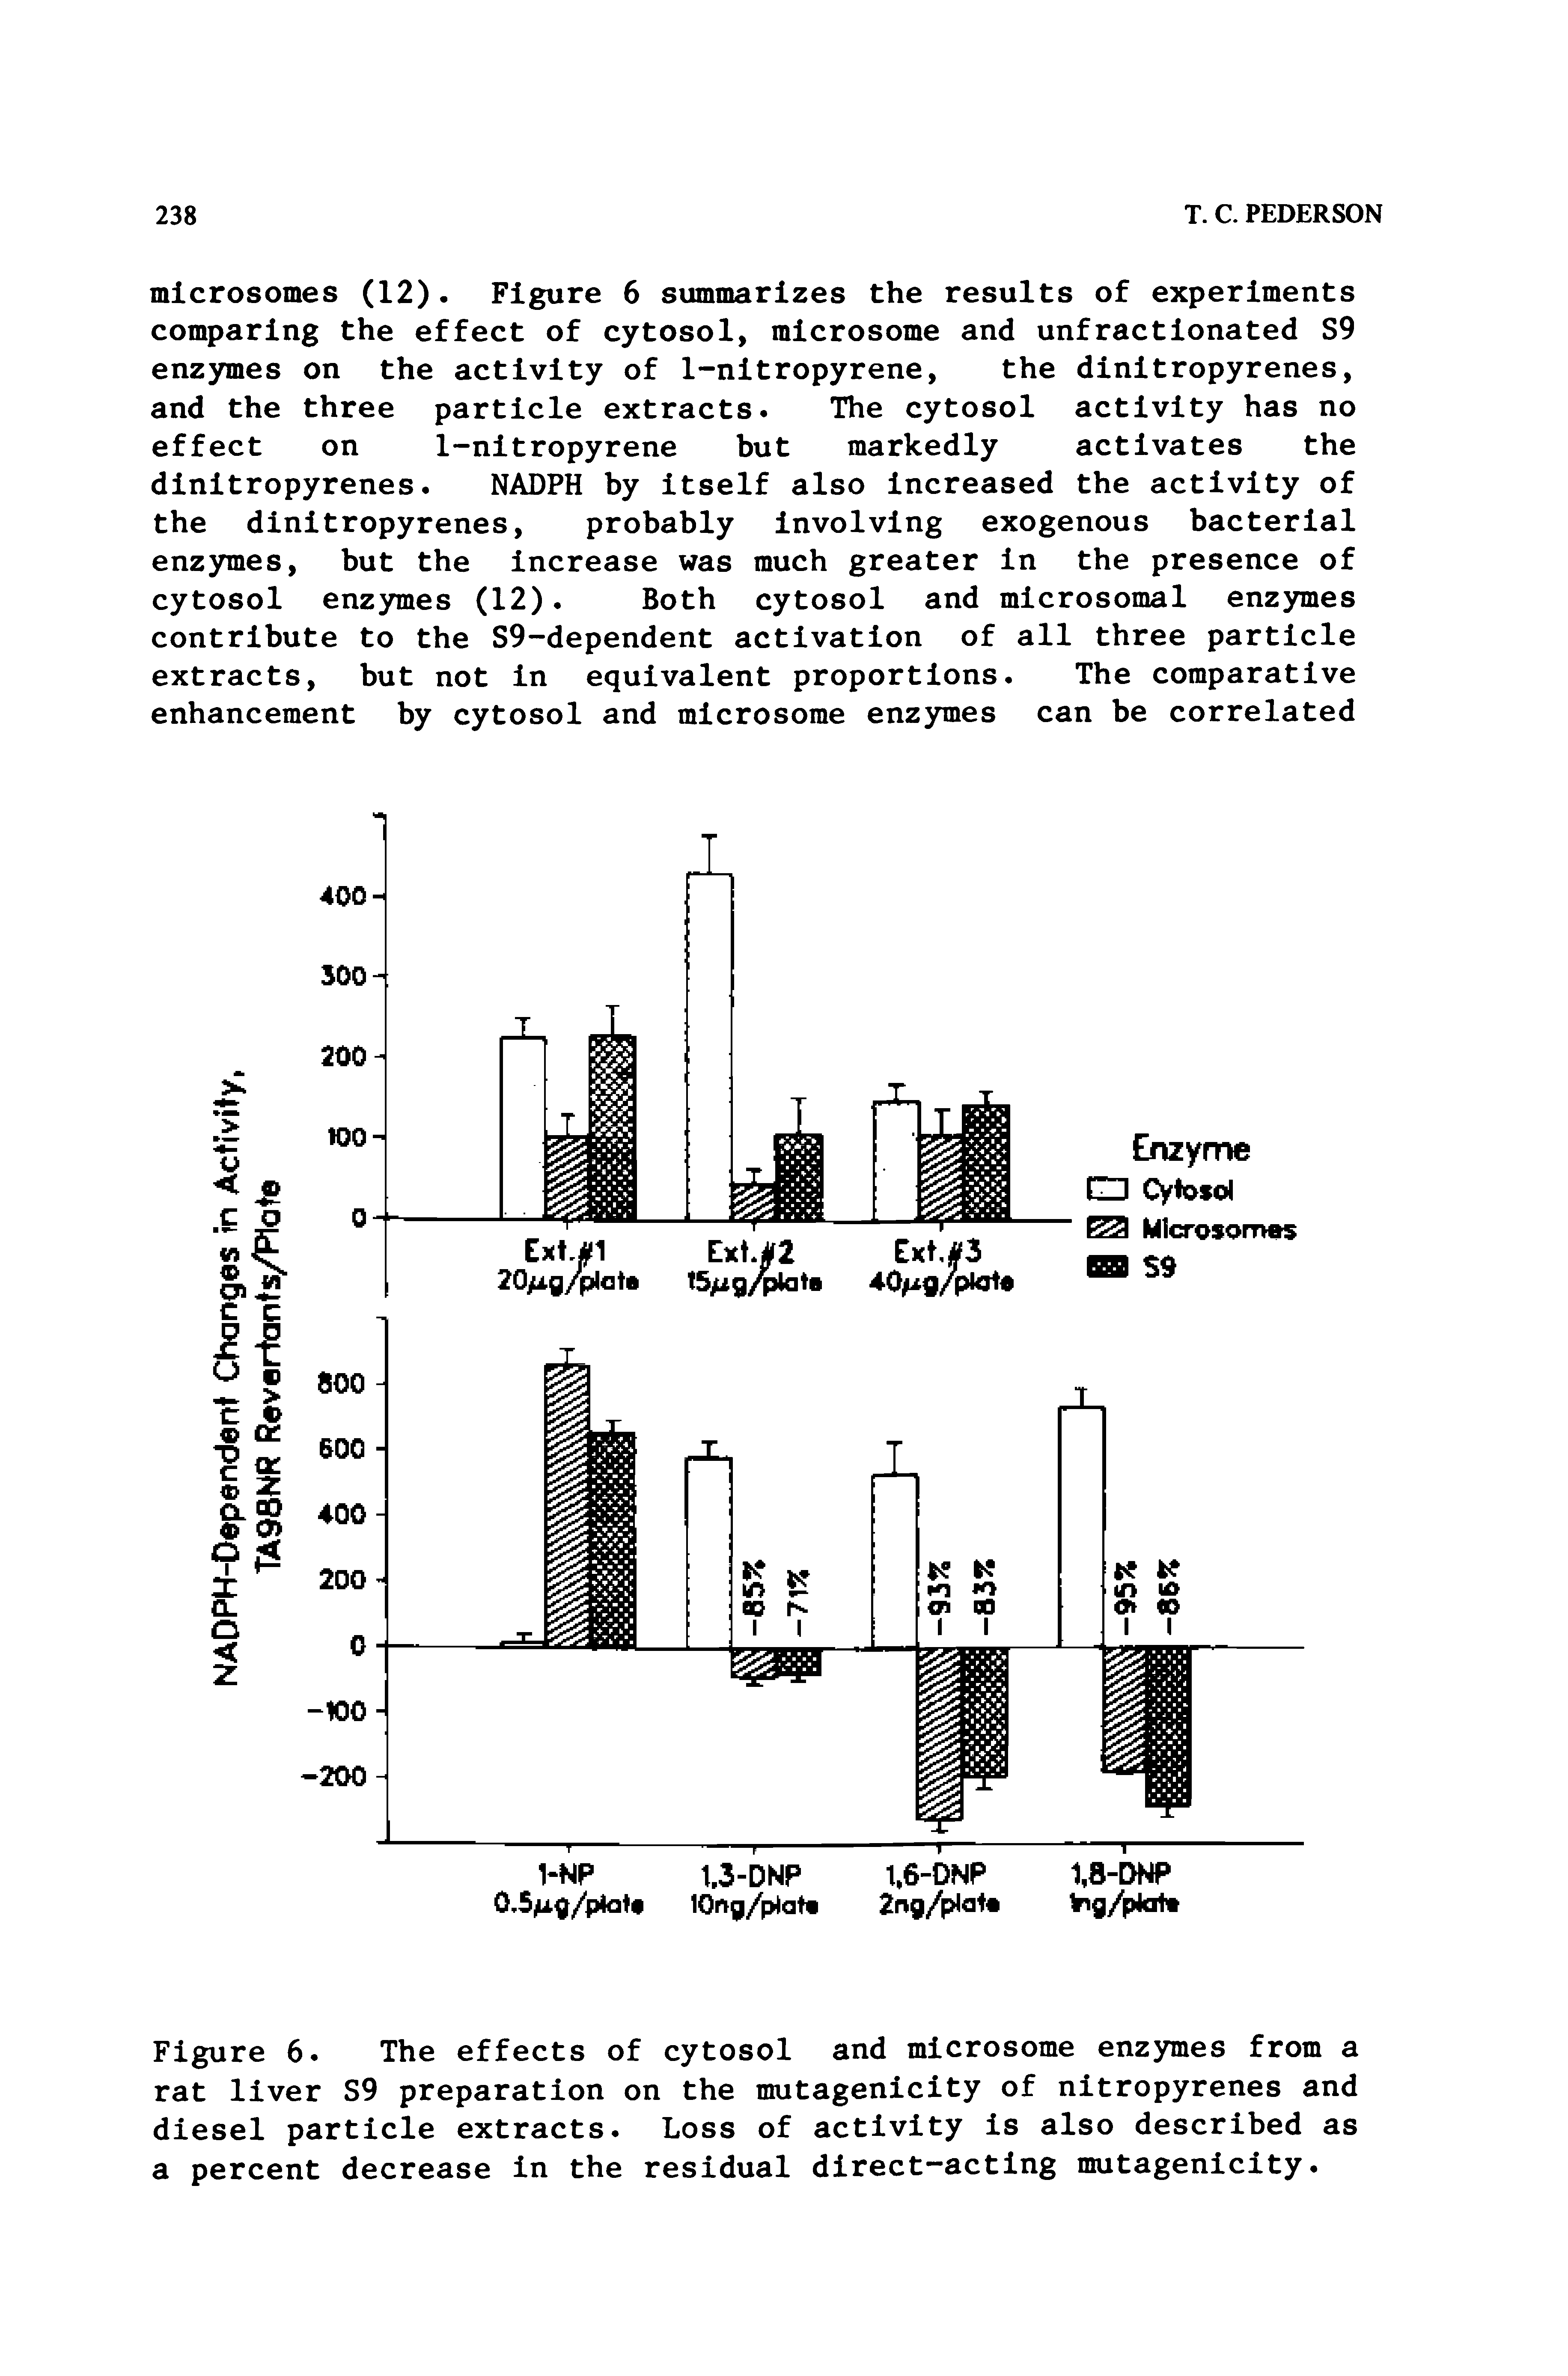 Figure 6. The effects of cytosol and microsome enzymes from a rat liver S9 preparation on the mutagenicity of nitropyrenes and diesel particle extracts. Loss of activity is also described as a percent decrease in the residual direct-acting mutagenicity.